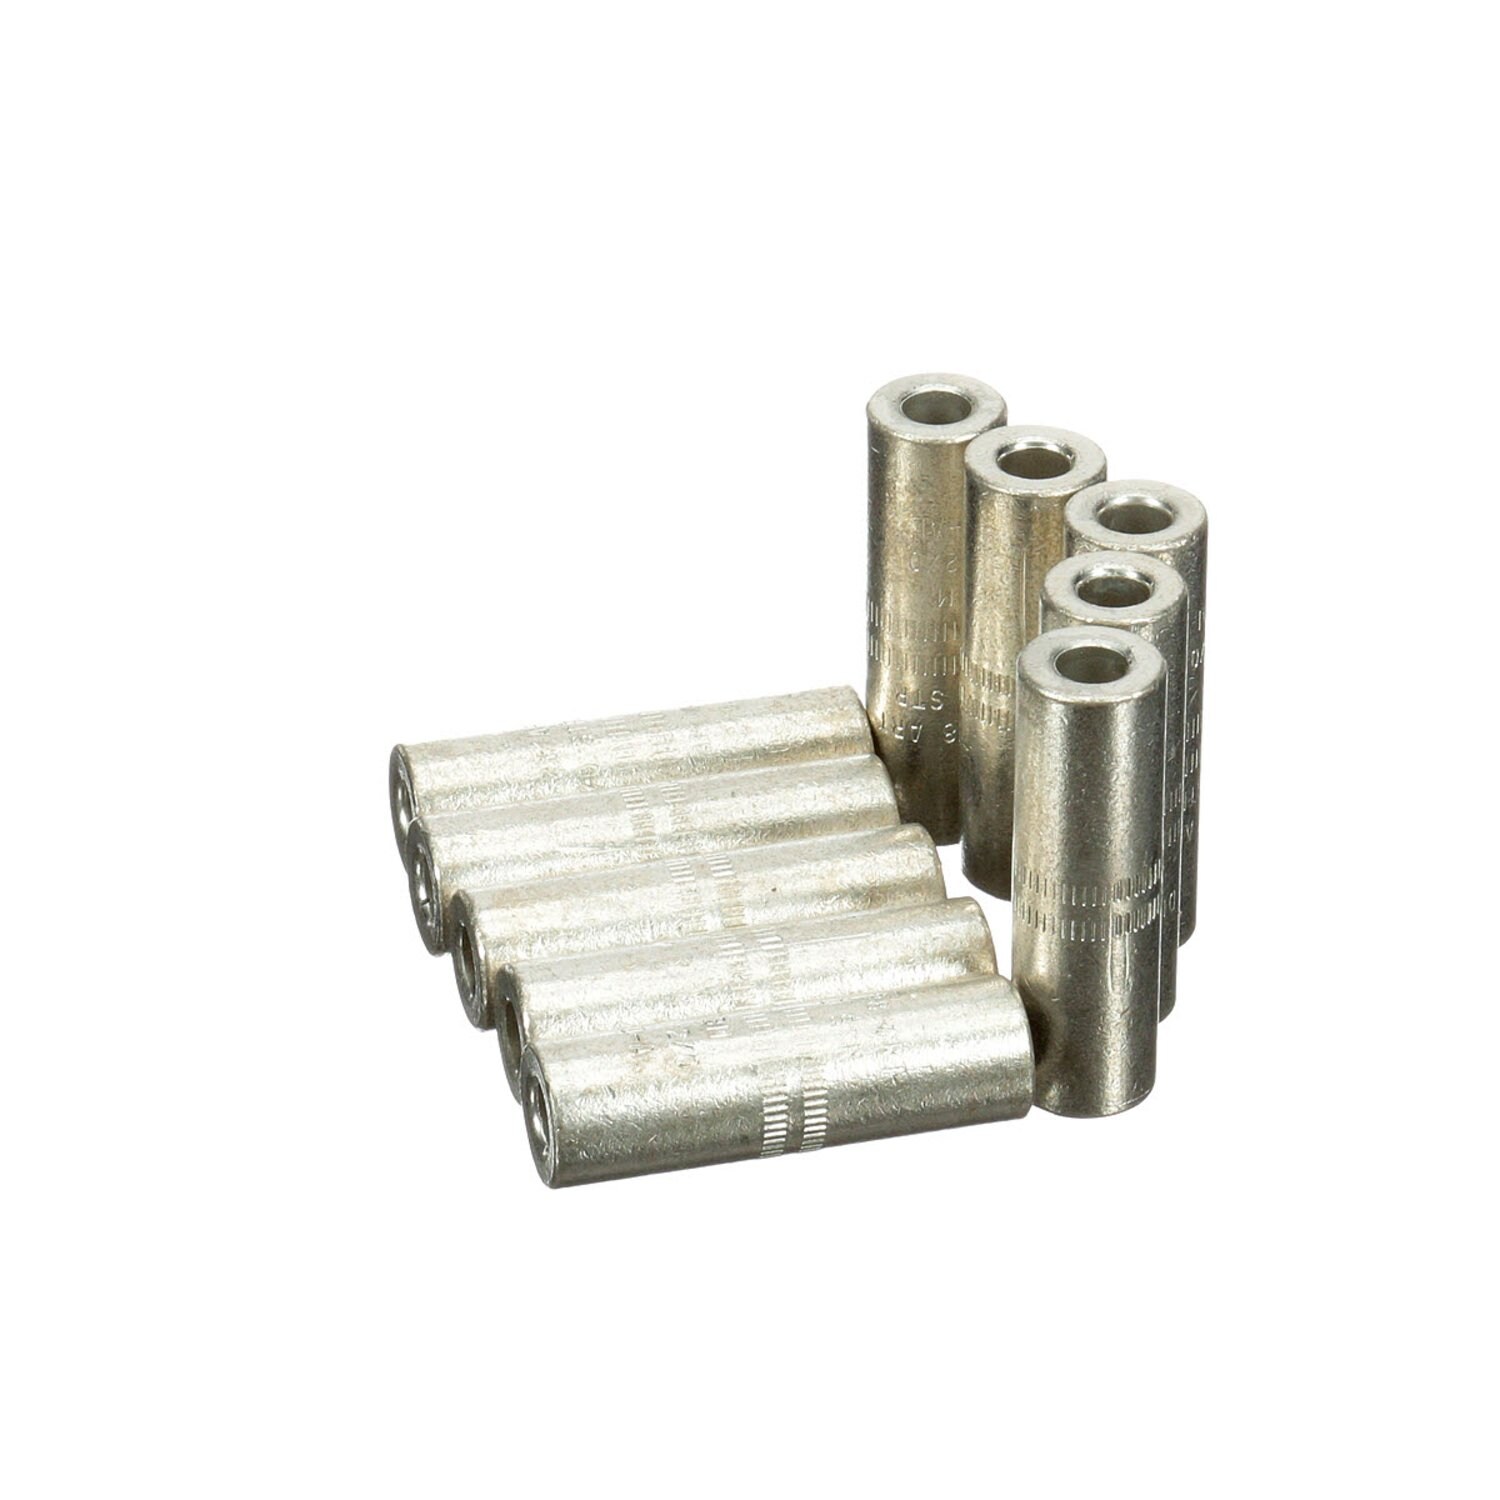 7000149305 - 3M Aluminum Connector CI-4/0, up to 35 kV, 4/0 AWG, Connector O.D. 0.910 in (23,1 mm), Compact, Stranded, 10/Case